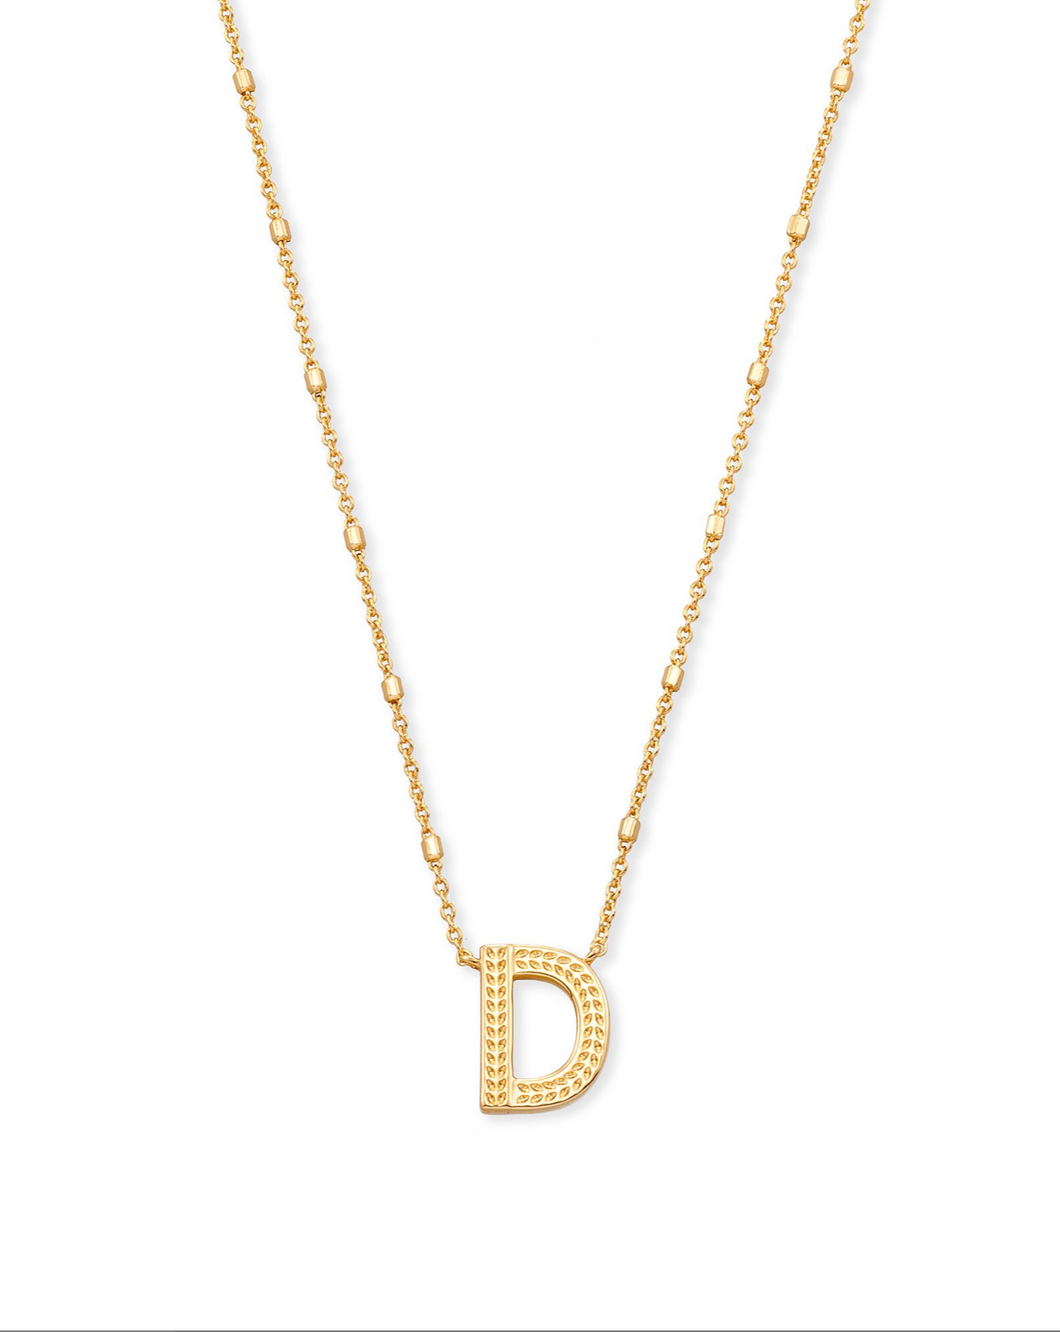 Letter D Pendant Necklace in Gold by Kendra Scott